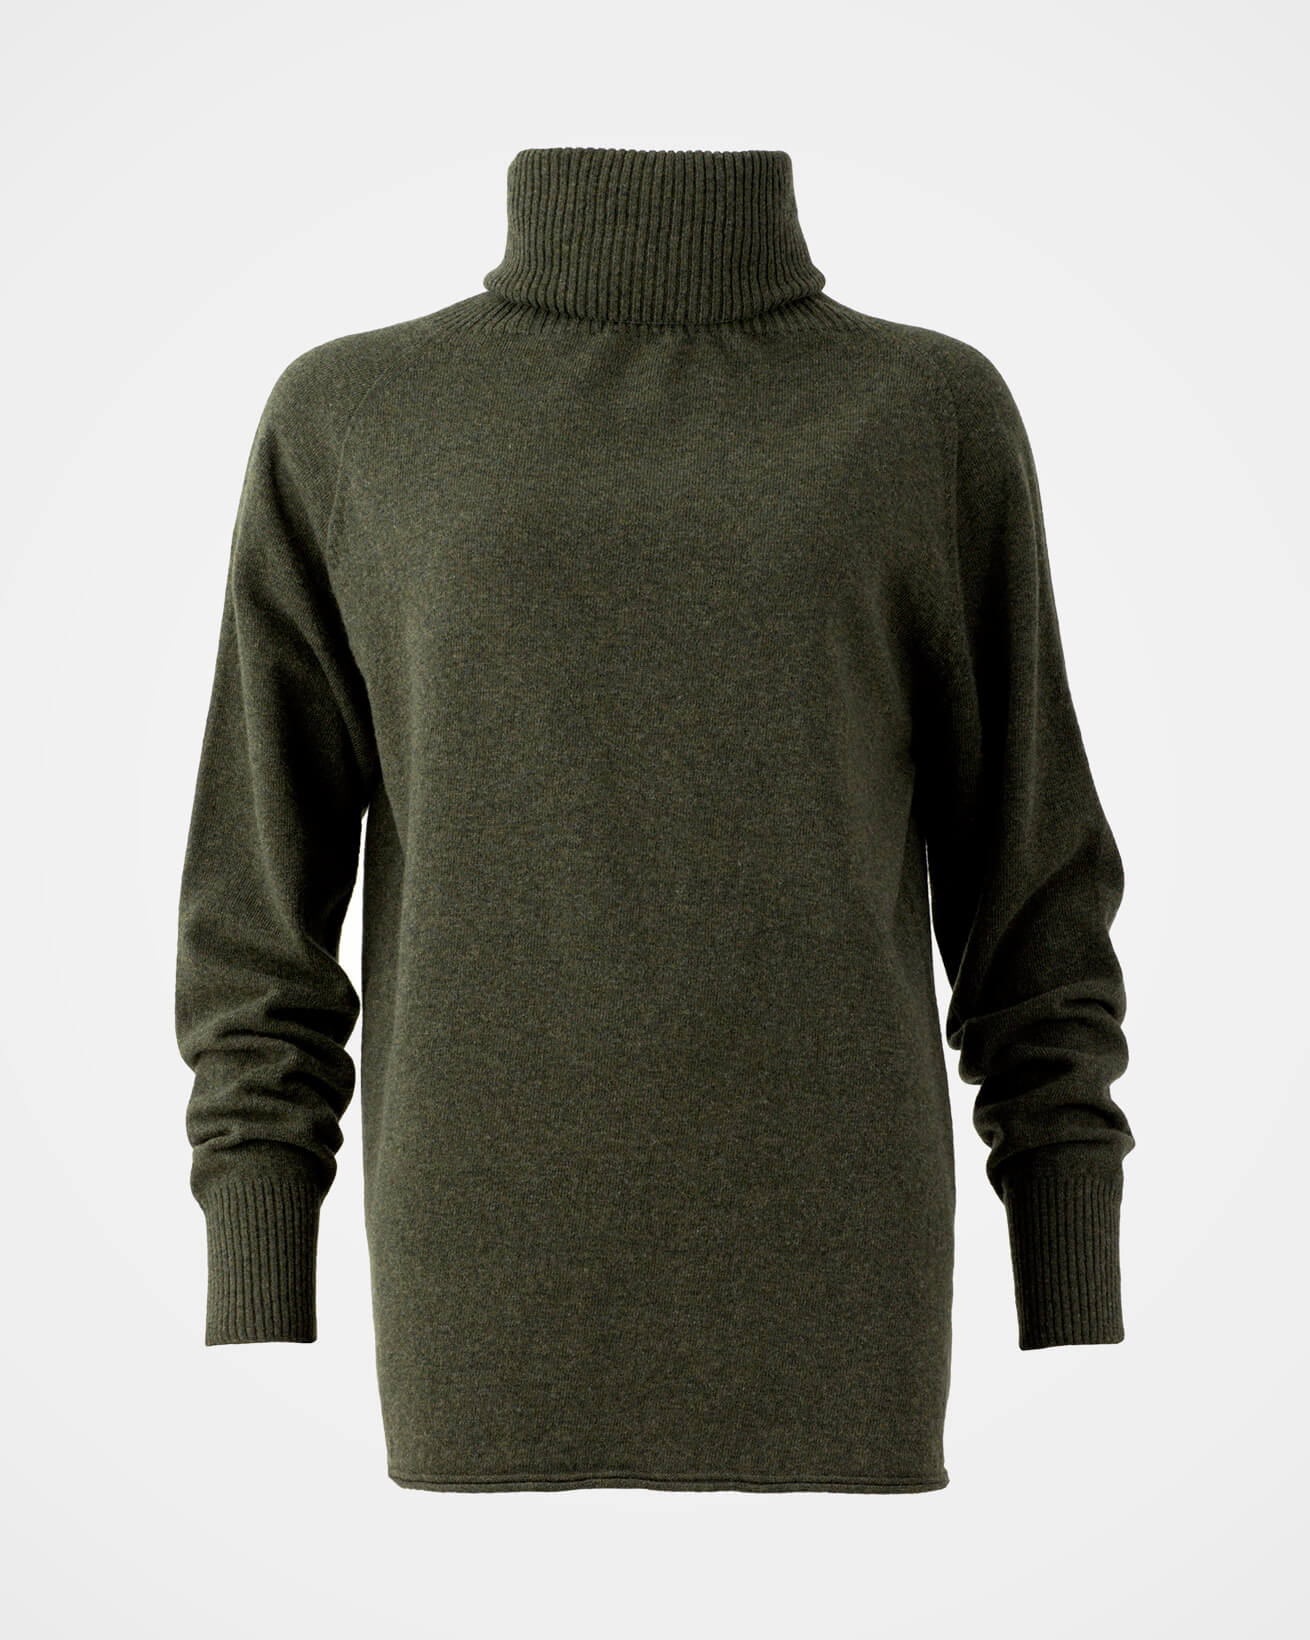 7505_geelong-slouch-roll-neck_olive_front_web.jpg